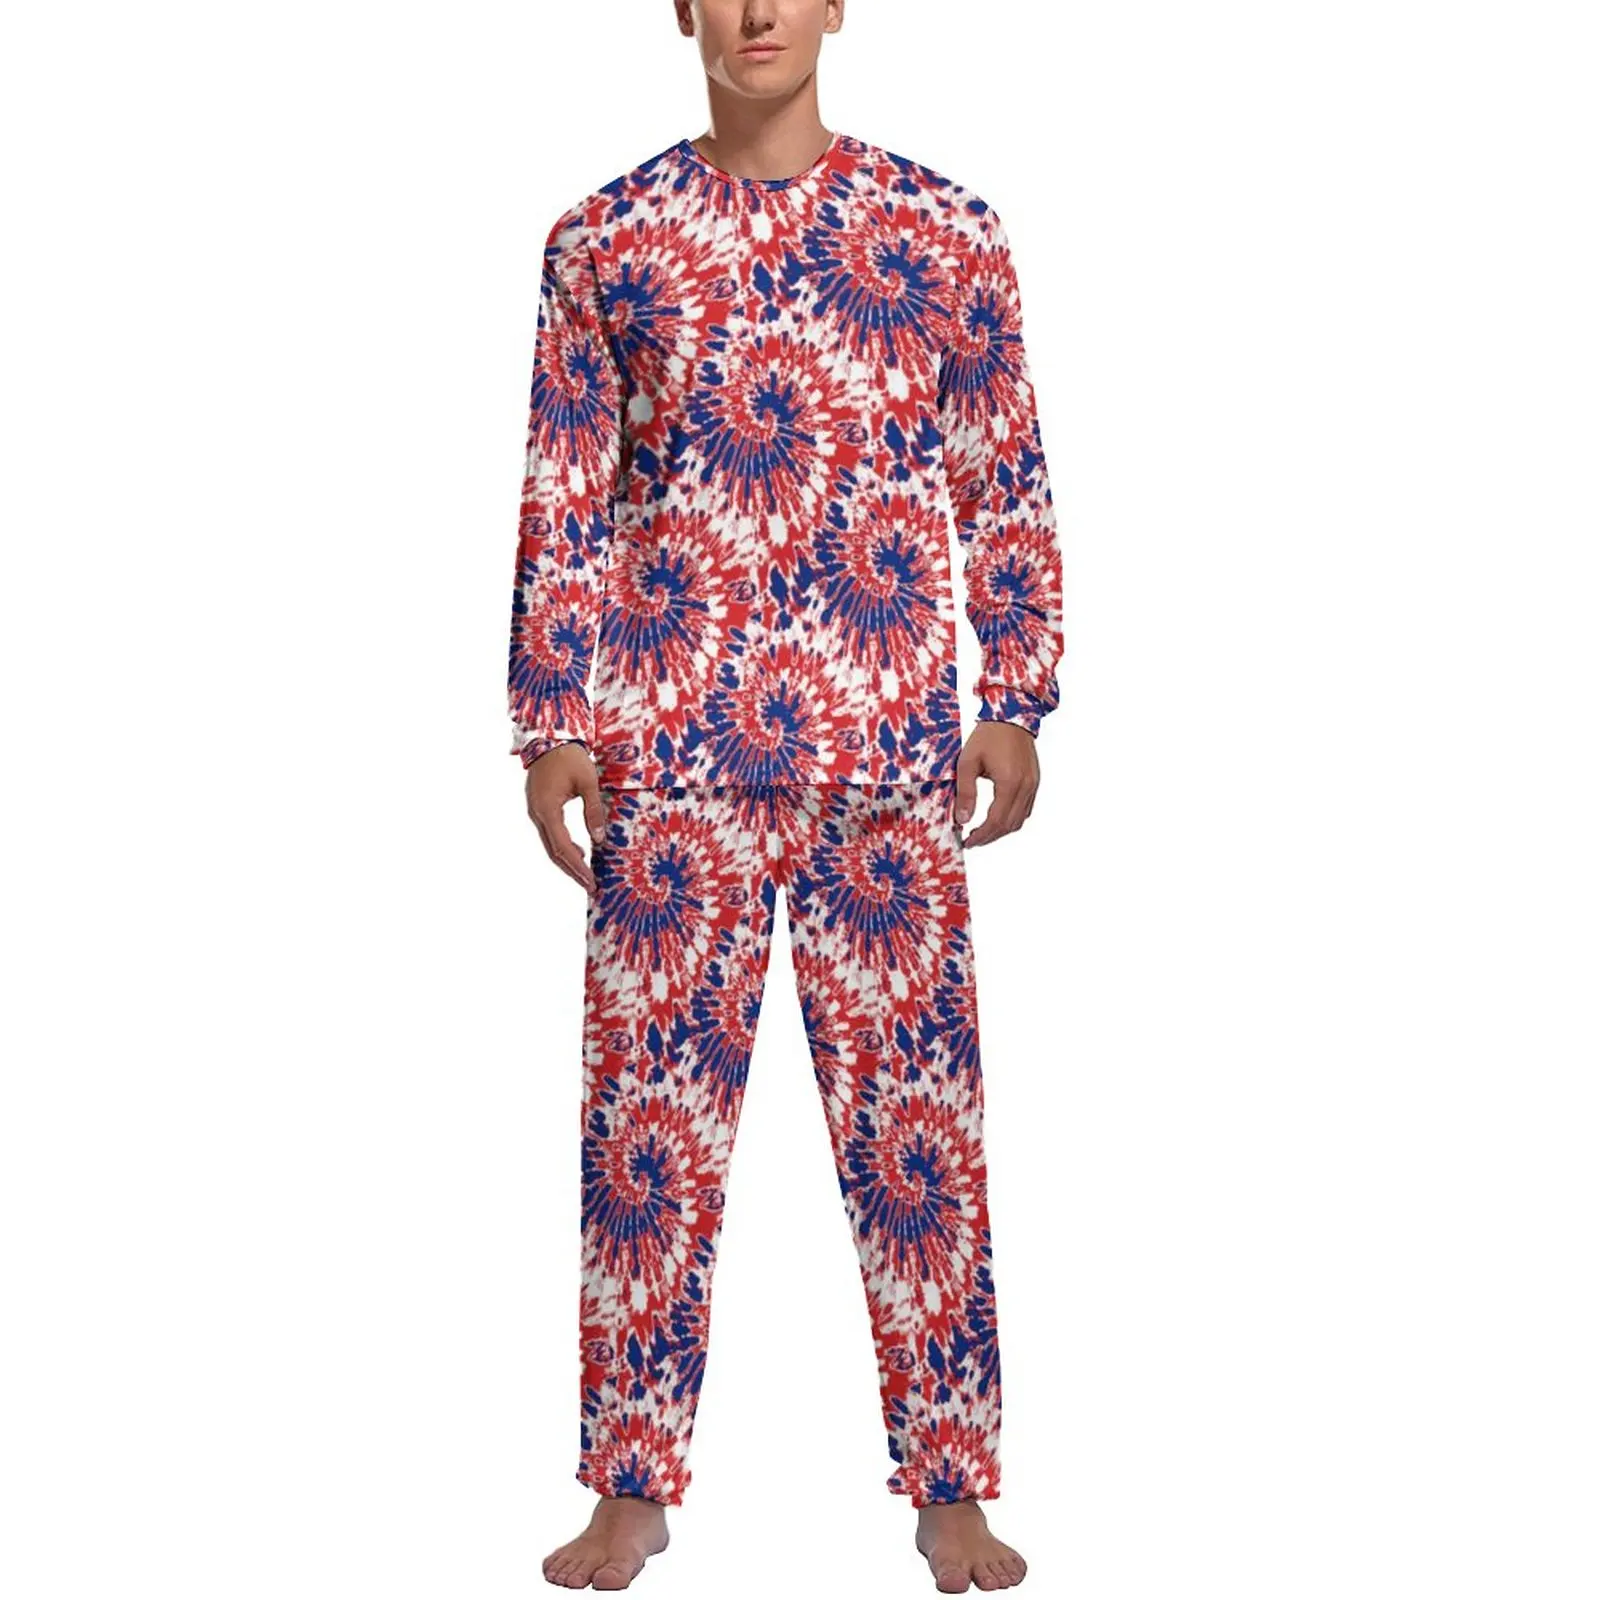 Firework Tie-Dye Pajamas Long Sleeve Red White Blue 2 Pieces Casual Pajama Sets Spring Male Graphic Lovely Sleepwear